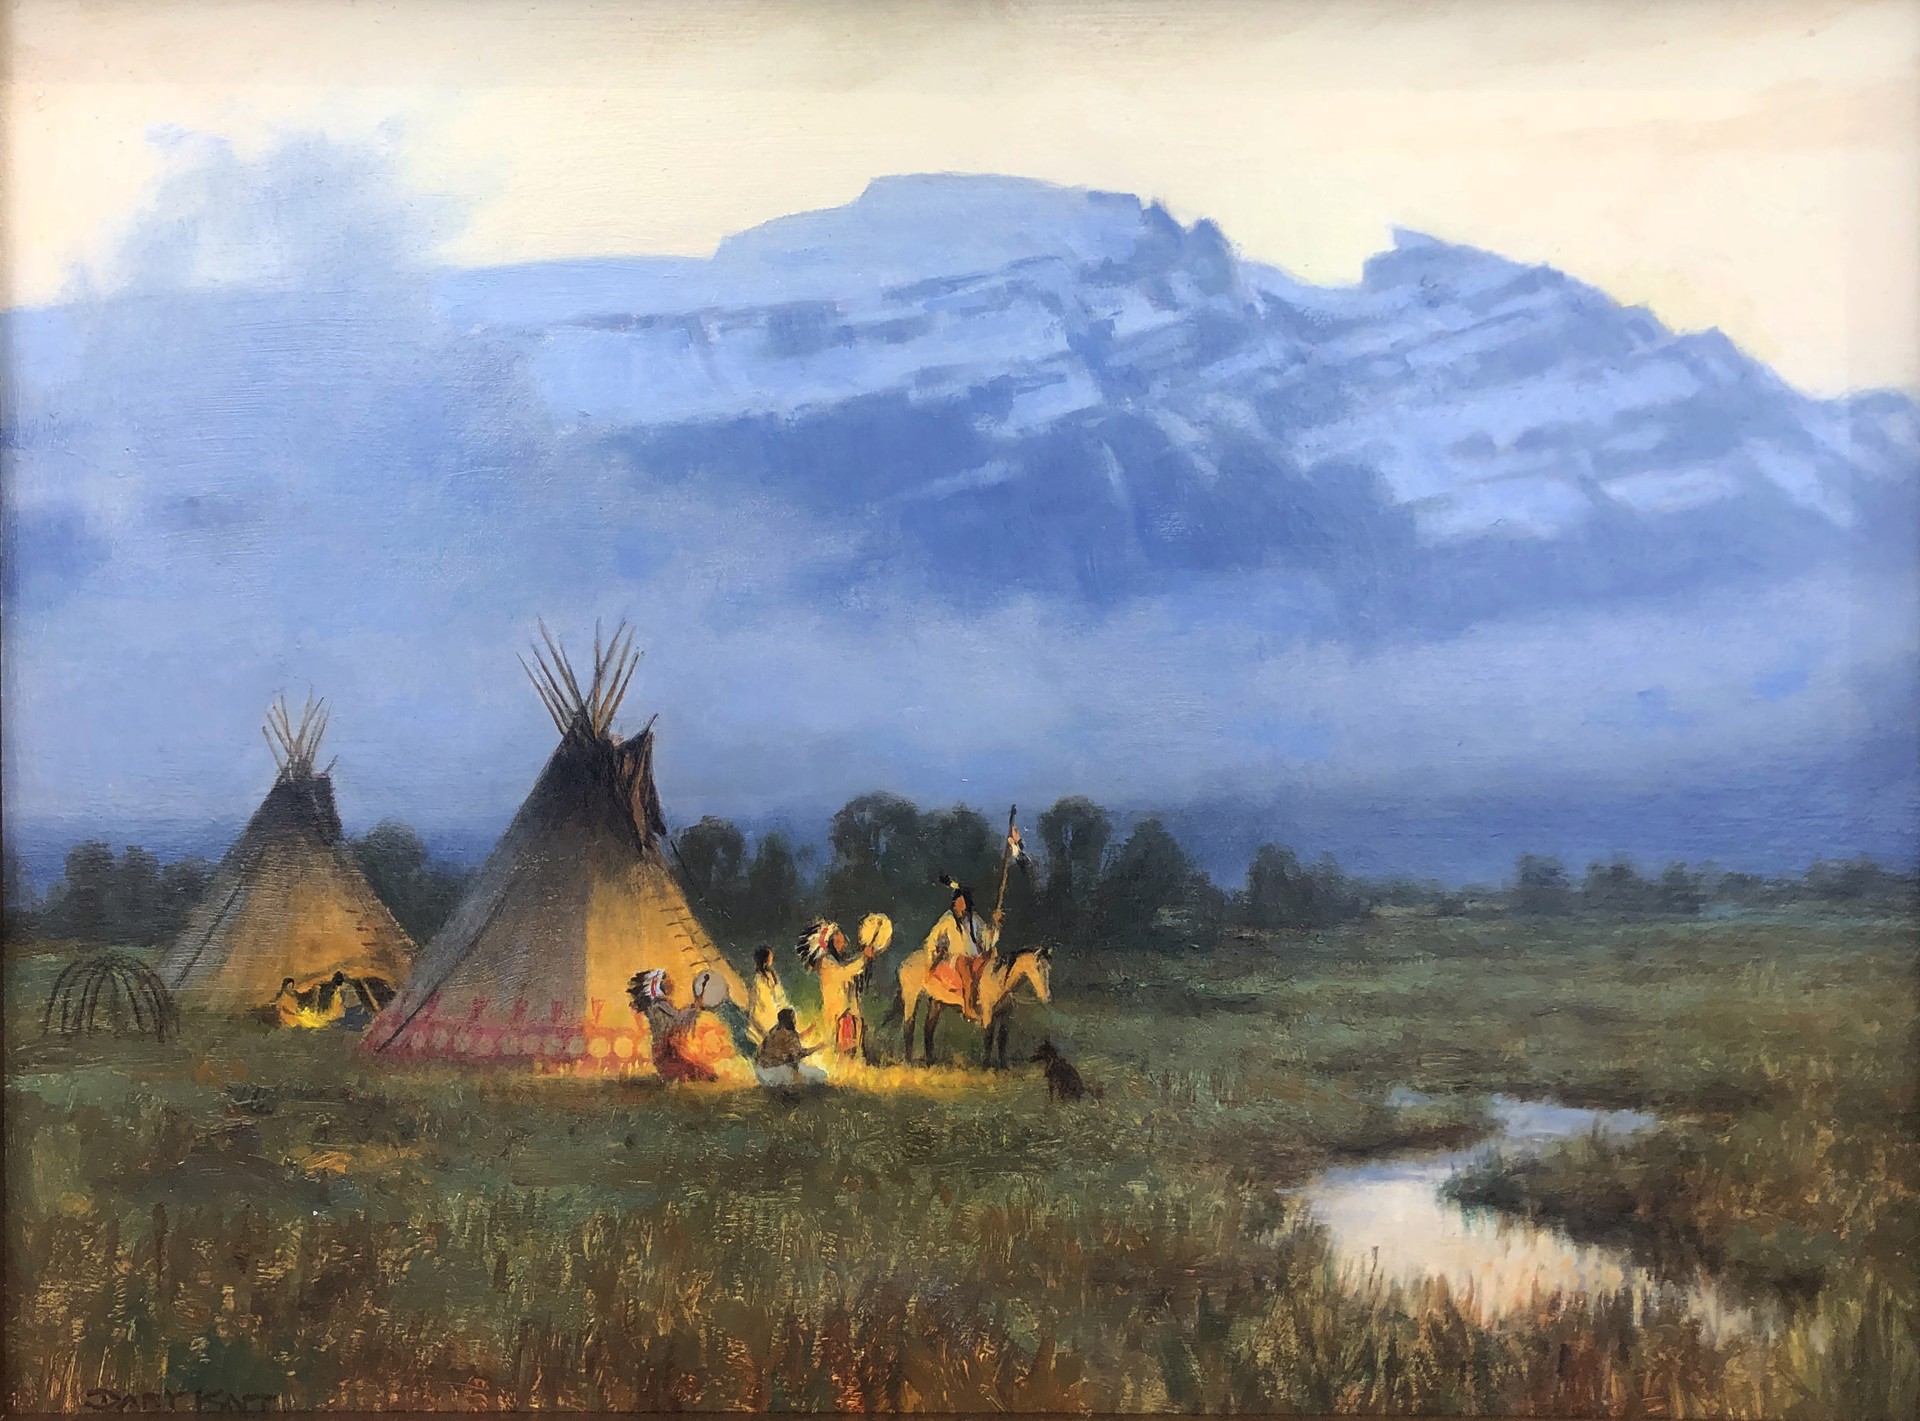 Camp at the Base of the Sleeping Indian by Gary Kapp